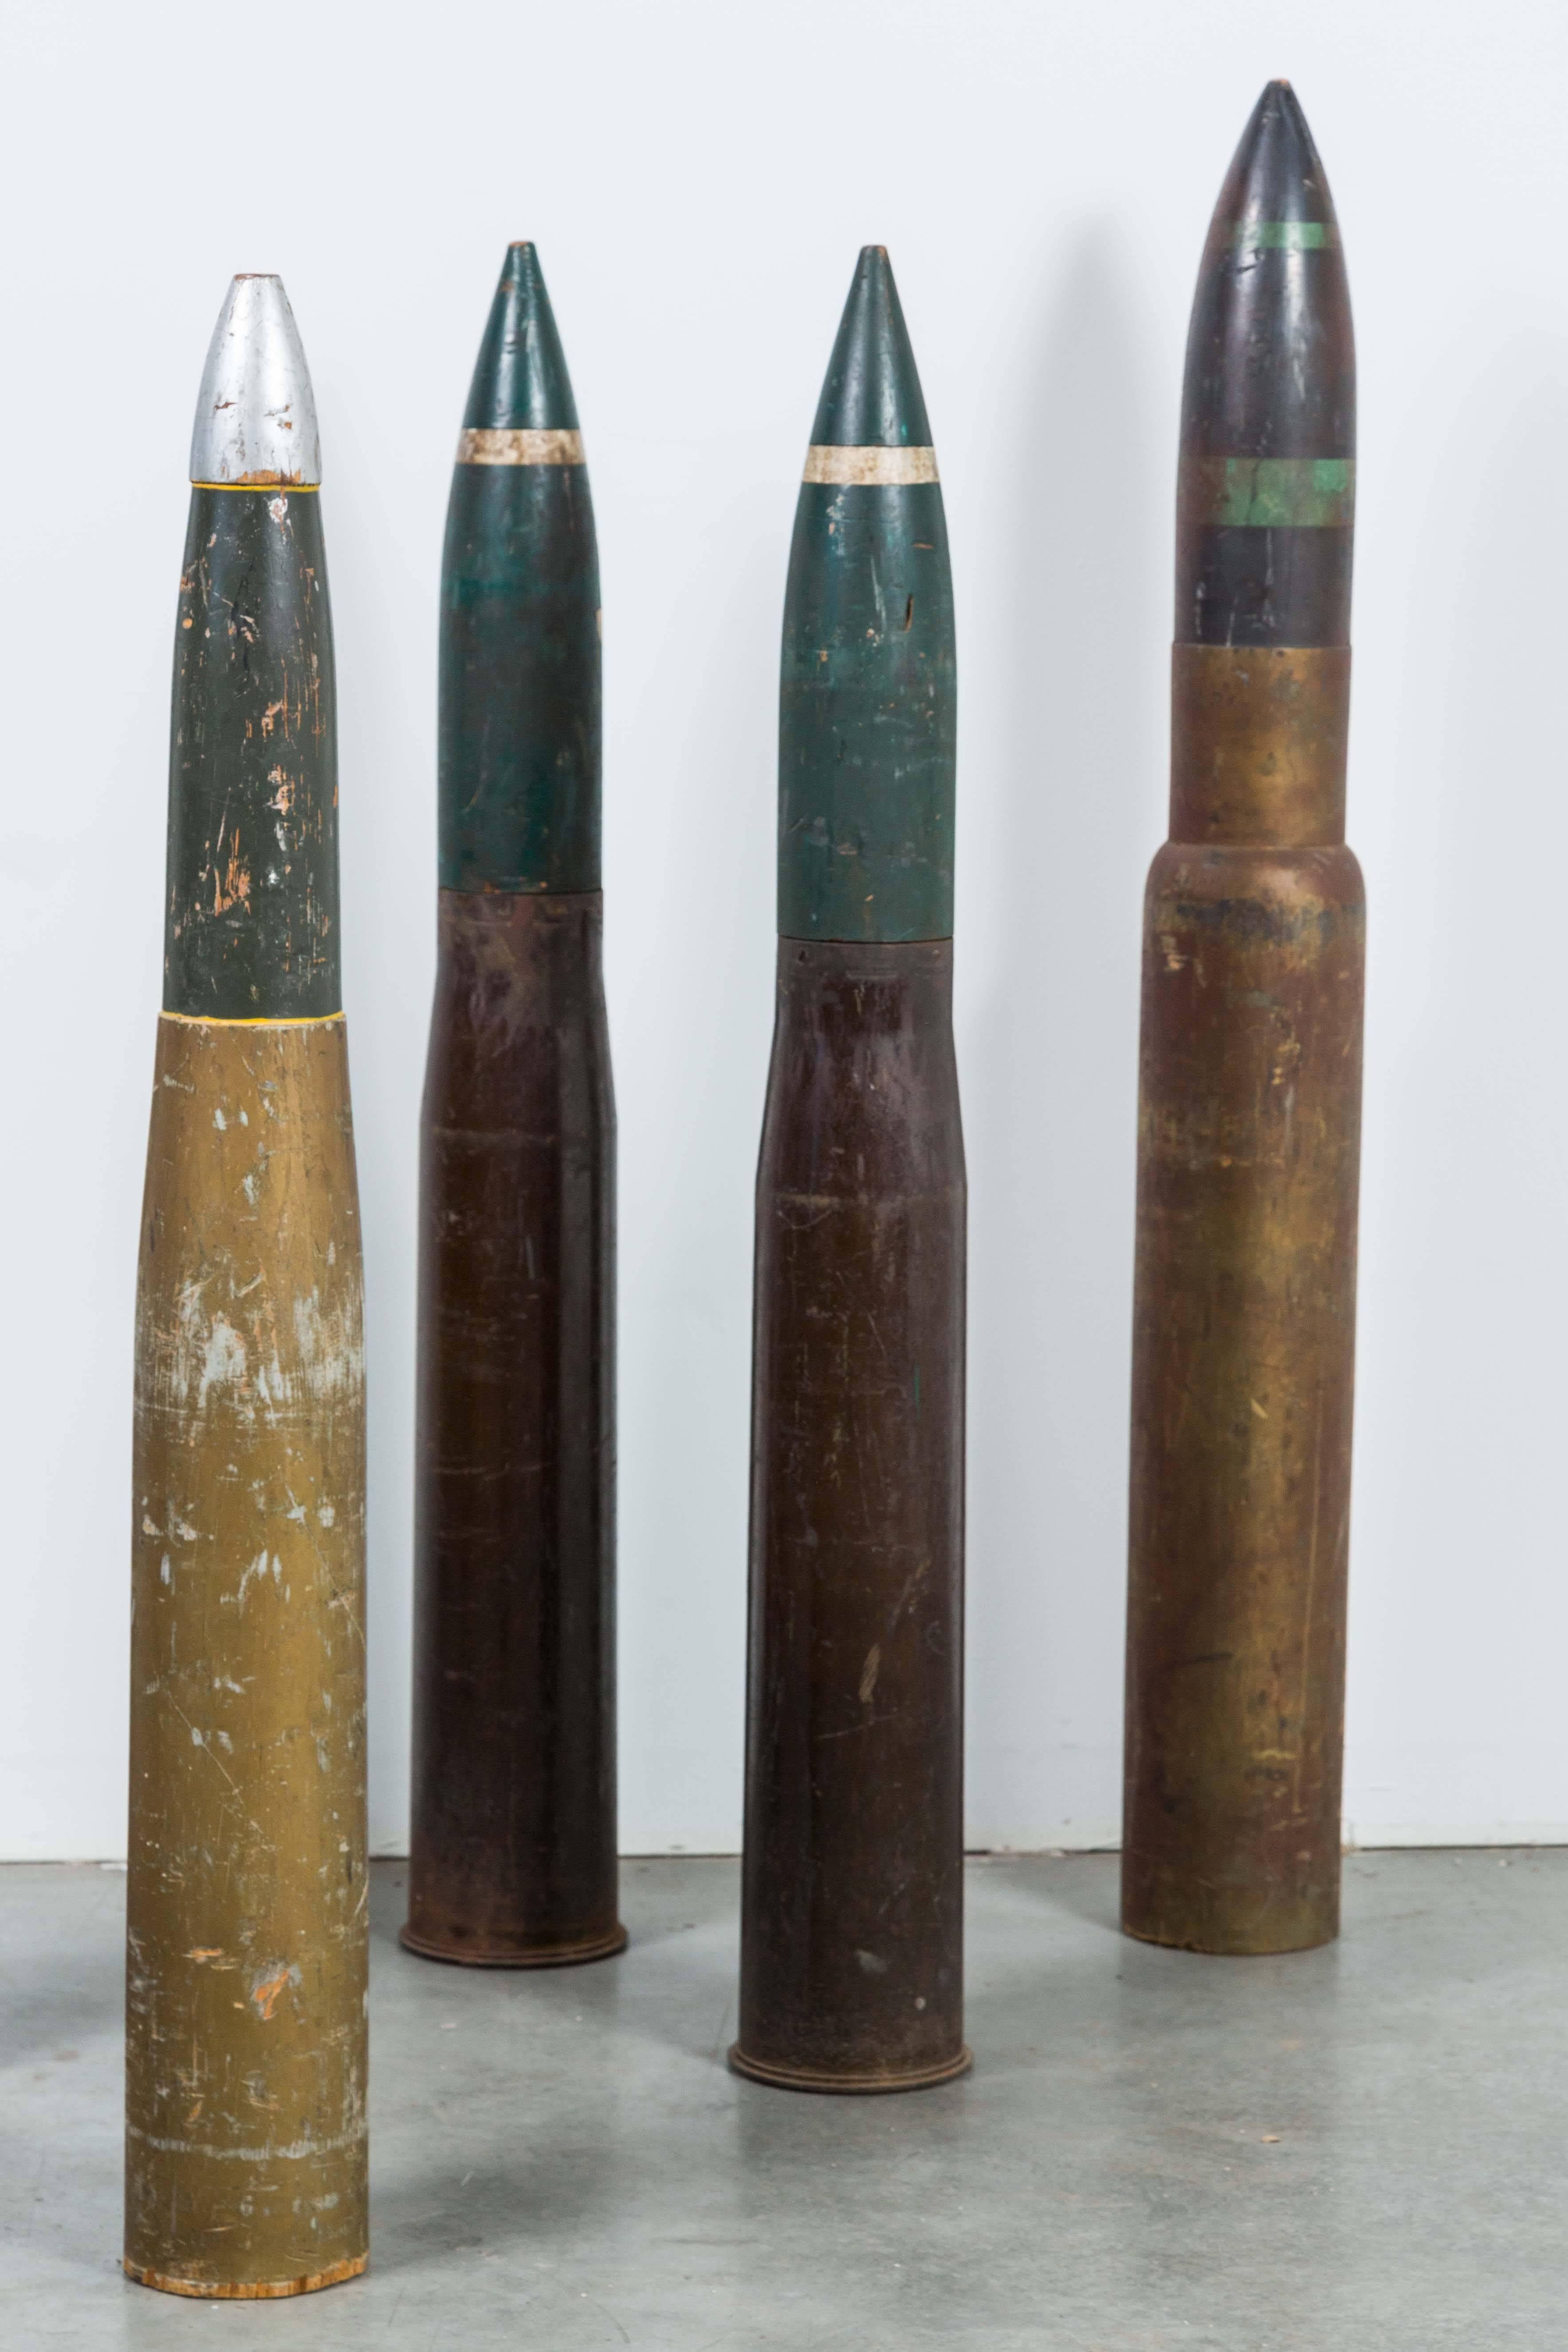 artillery shell for sale